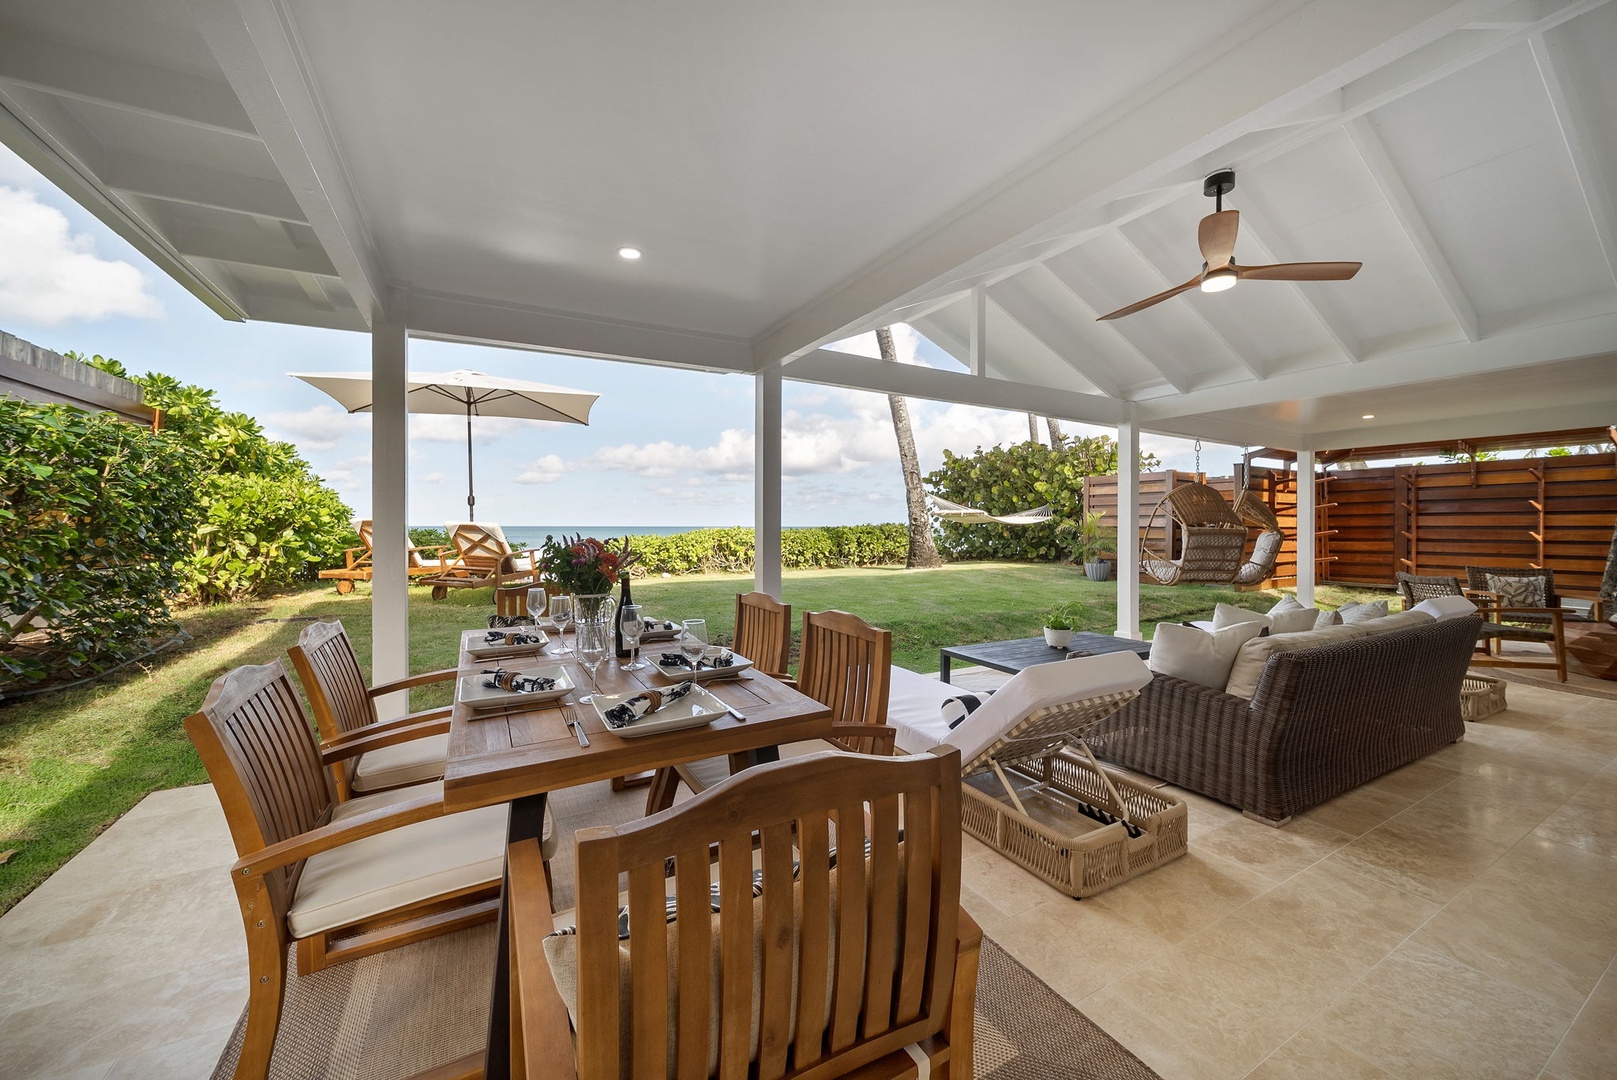 Haleiwa Vacation Rentals, Hale Nalu - The outdoor dining space has seating for 6